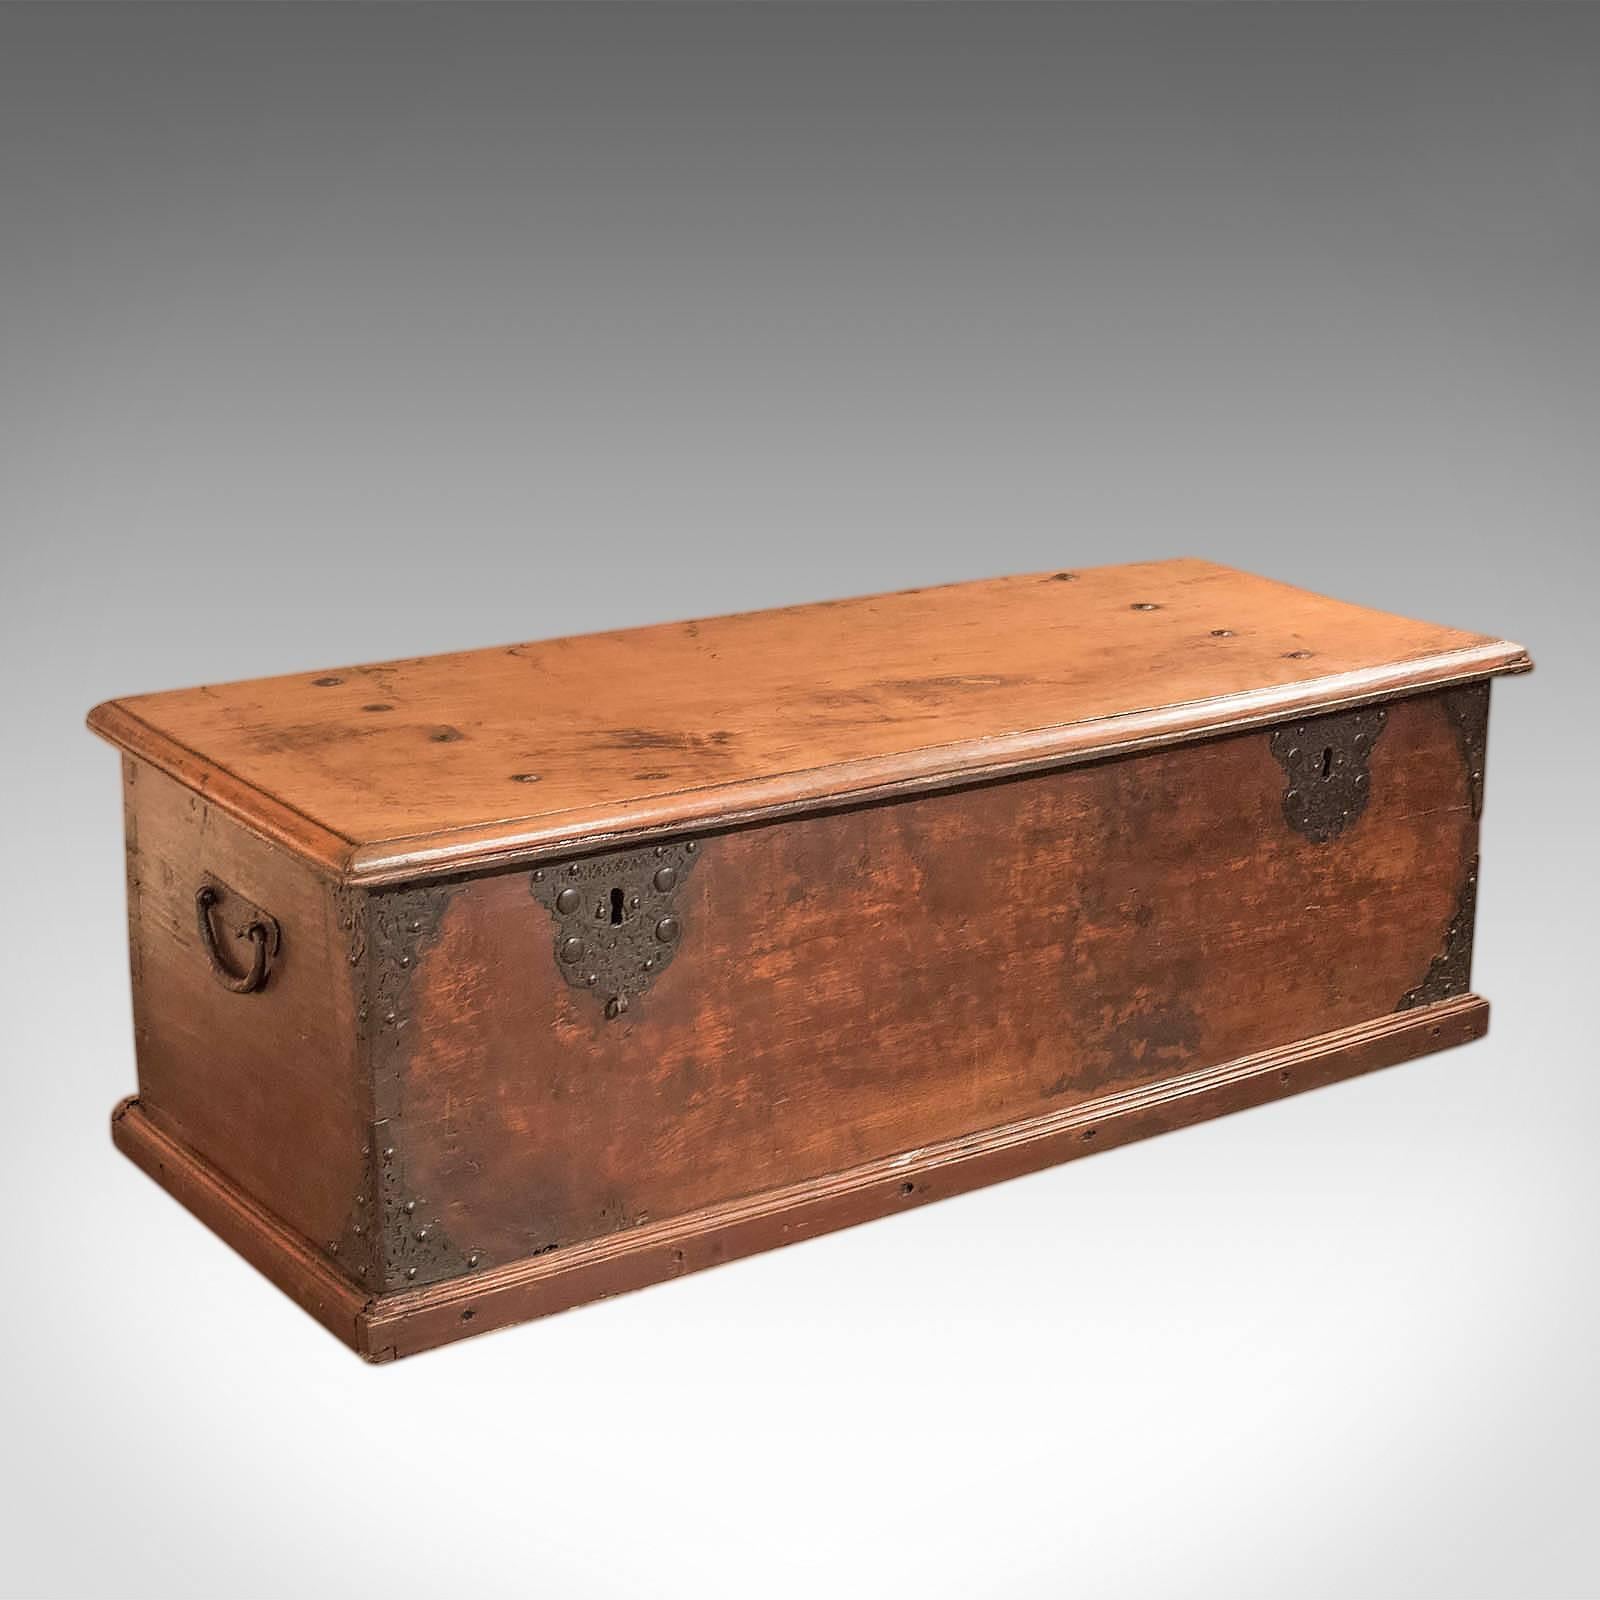 This is an antique, colonial hardwood chest dating to the early 19th century.

Raised on a plinth base, this large and heavy trunk is made from dense and solid hardwood boards with attractive graining and patina; part of the lid moulding retaining